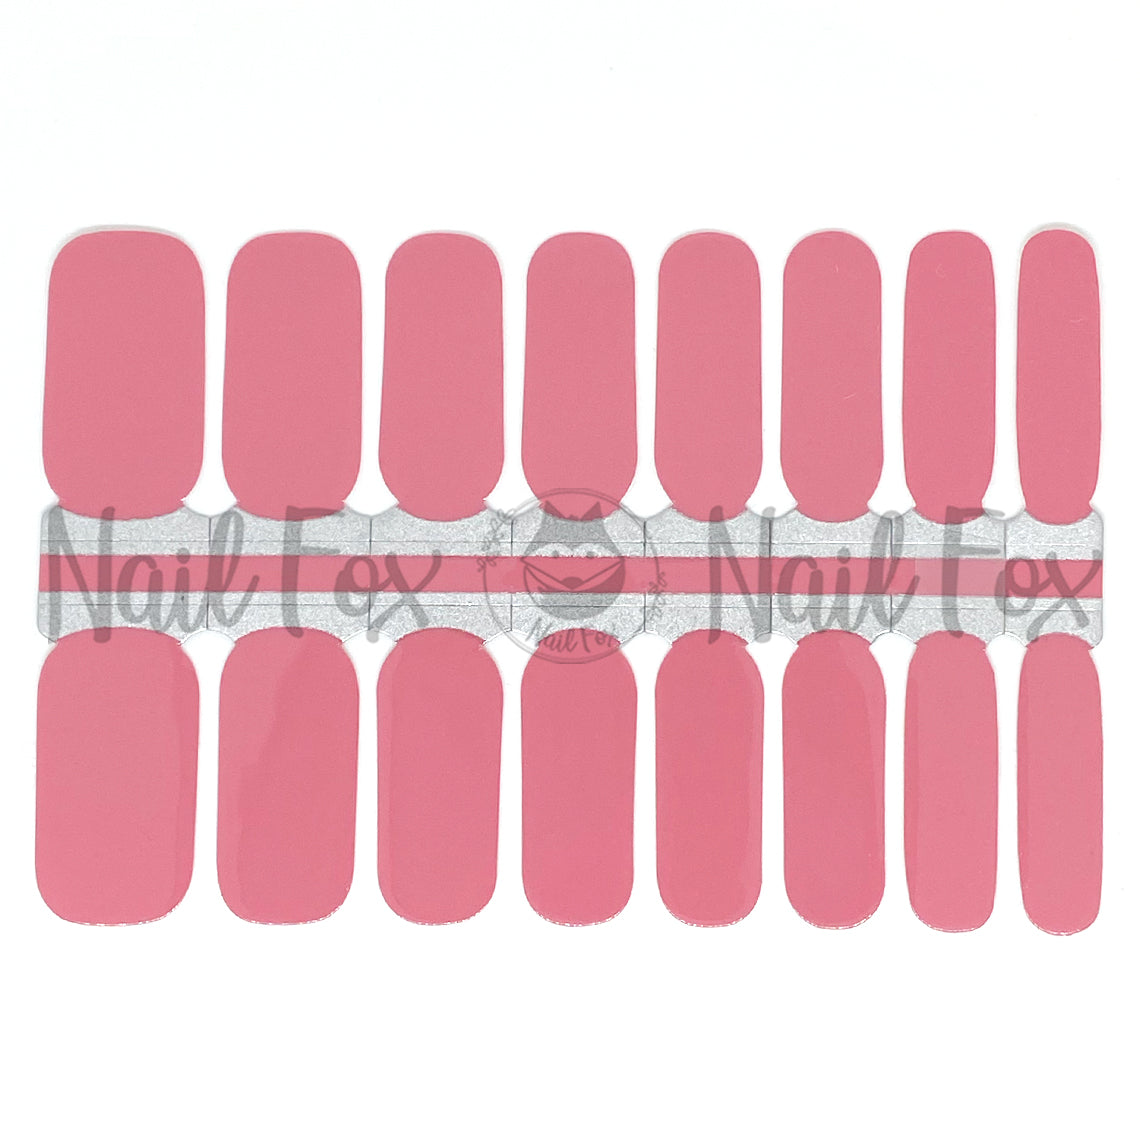 Dusty Pink Solid Nail Wraps